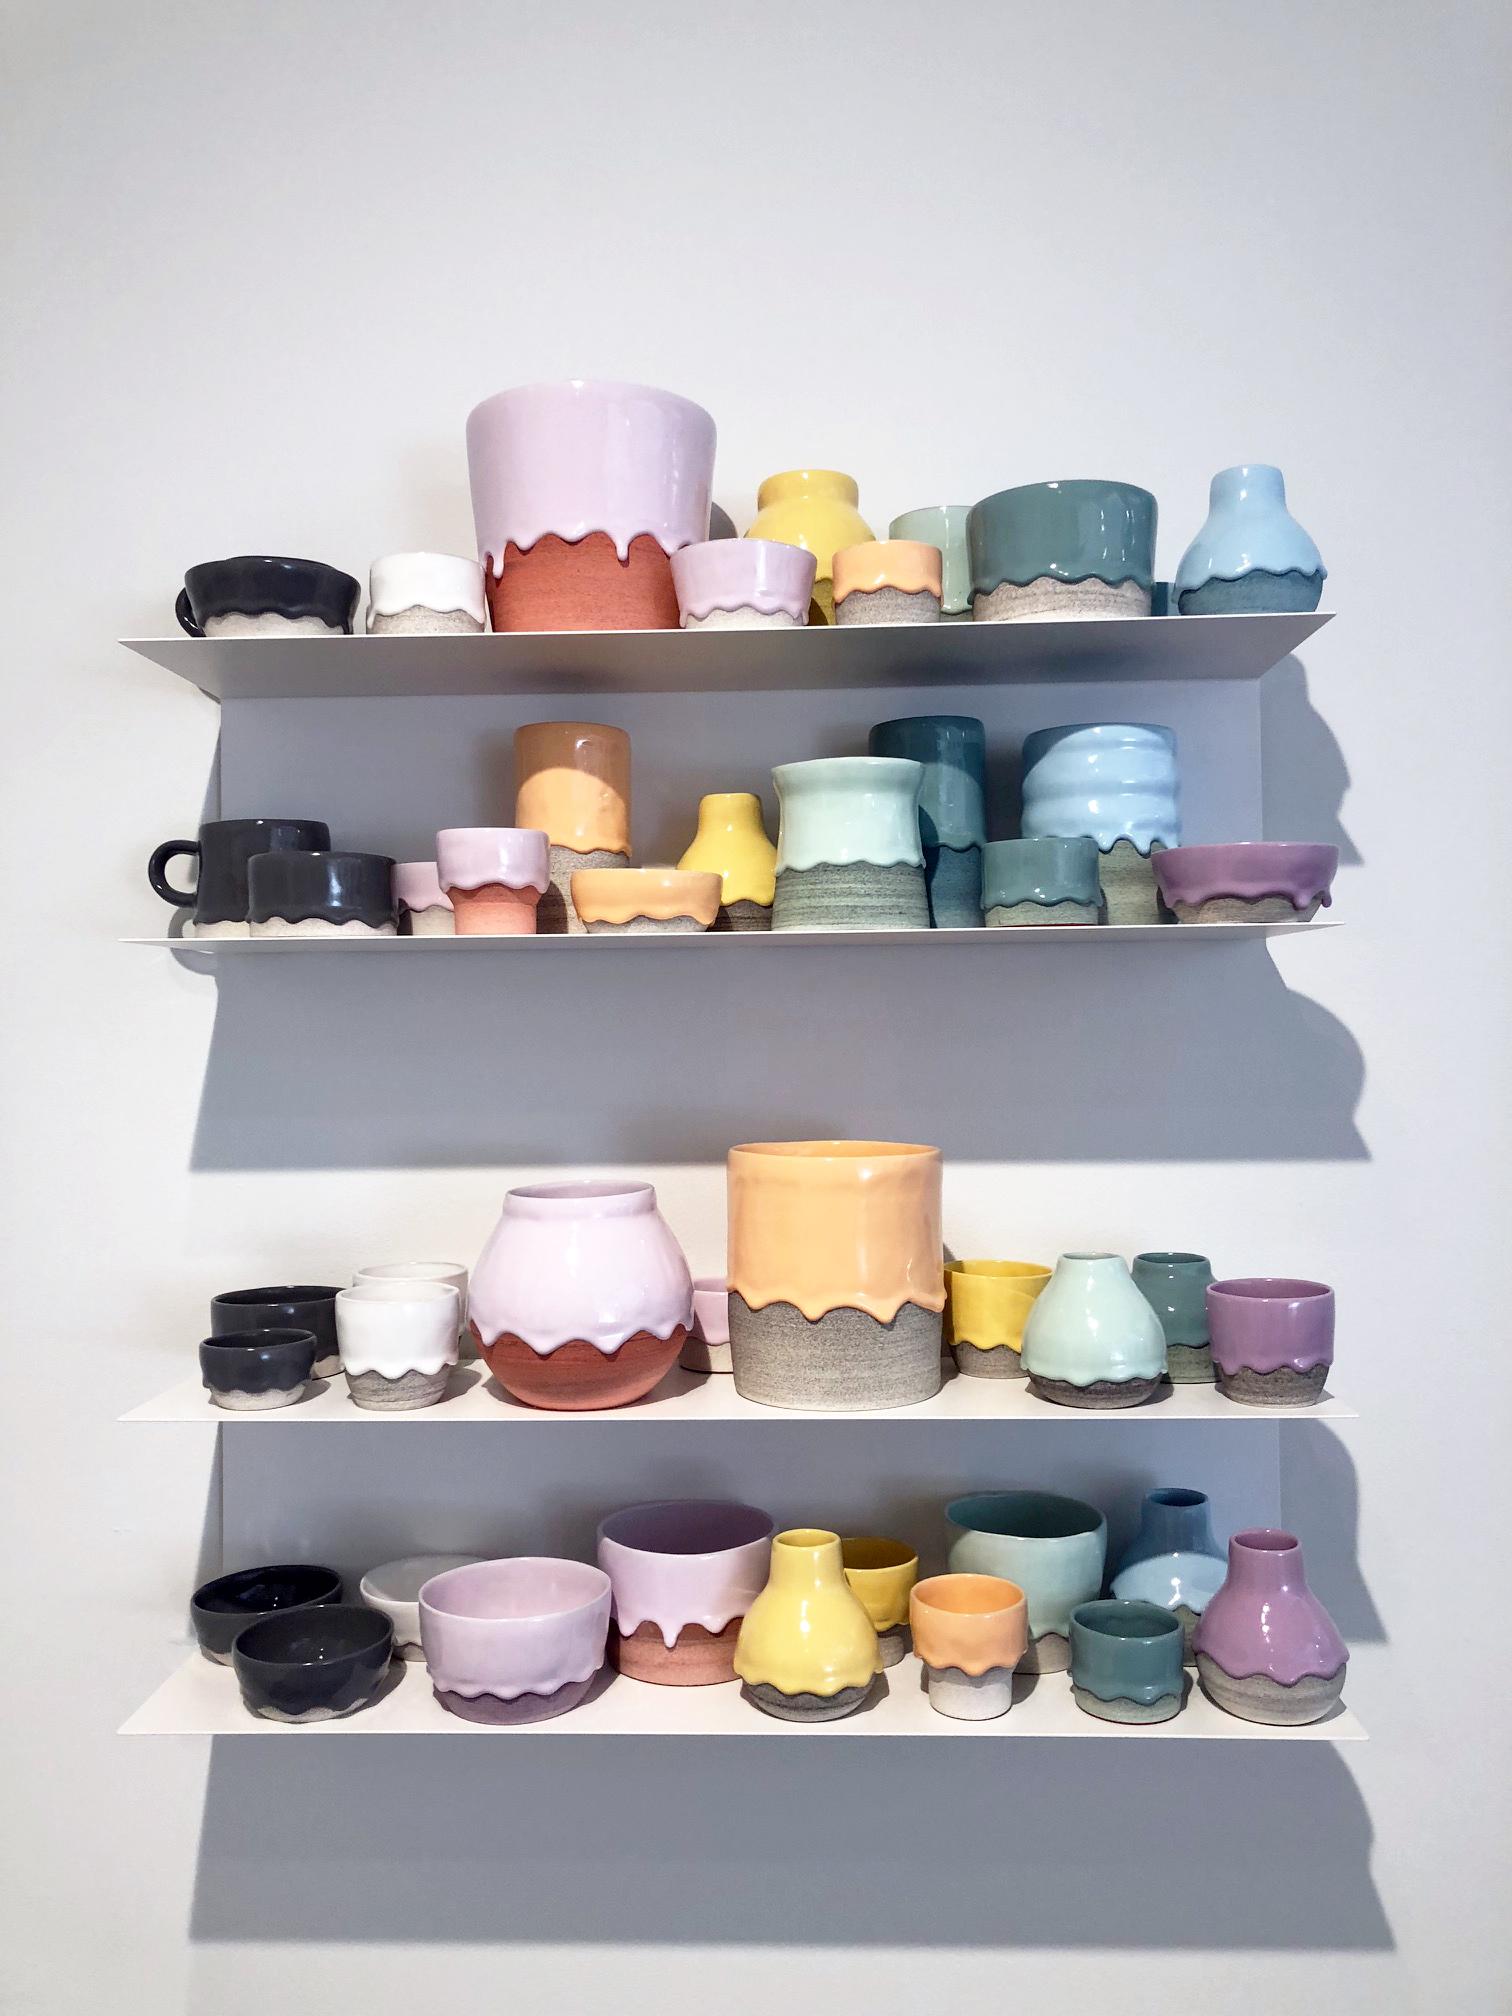 Ceramic Vessel Wall Installation with Shelving, 48 Individual Pieces, Colorful 2